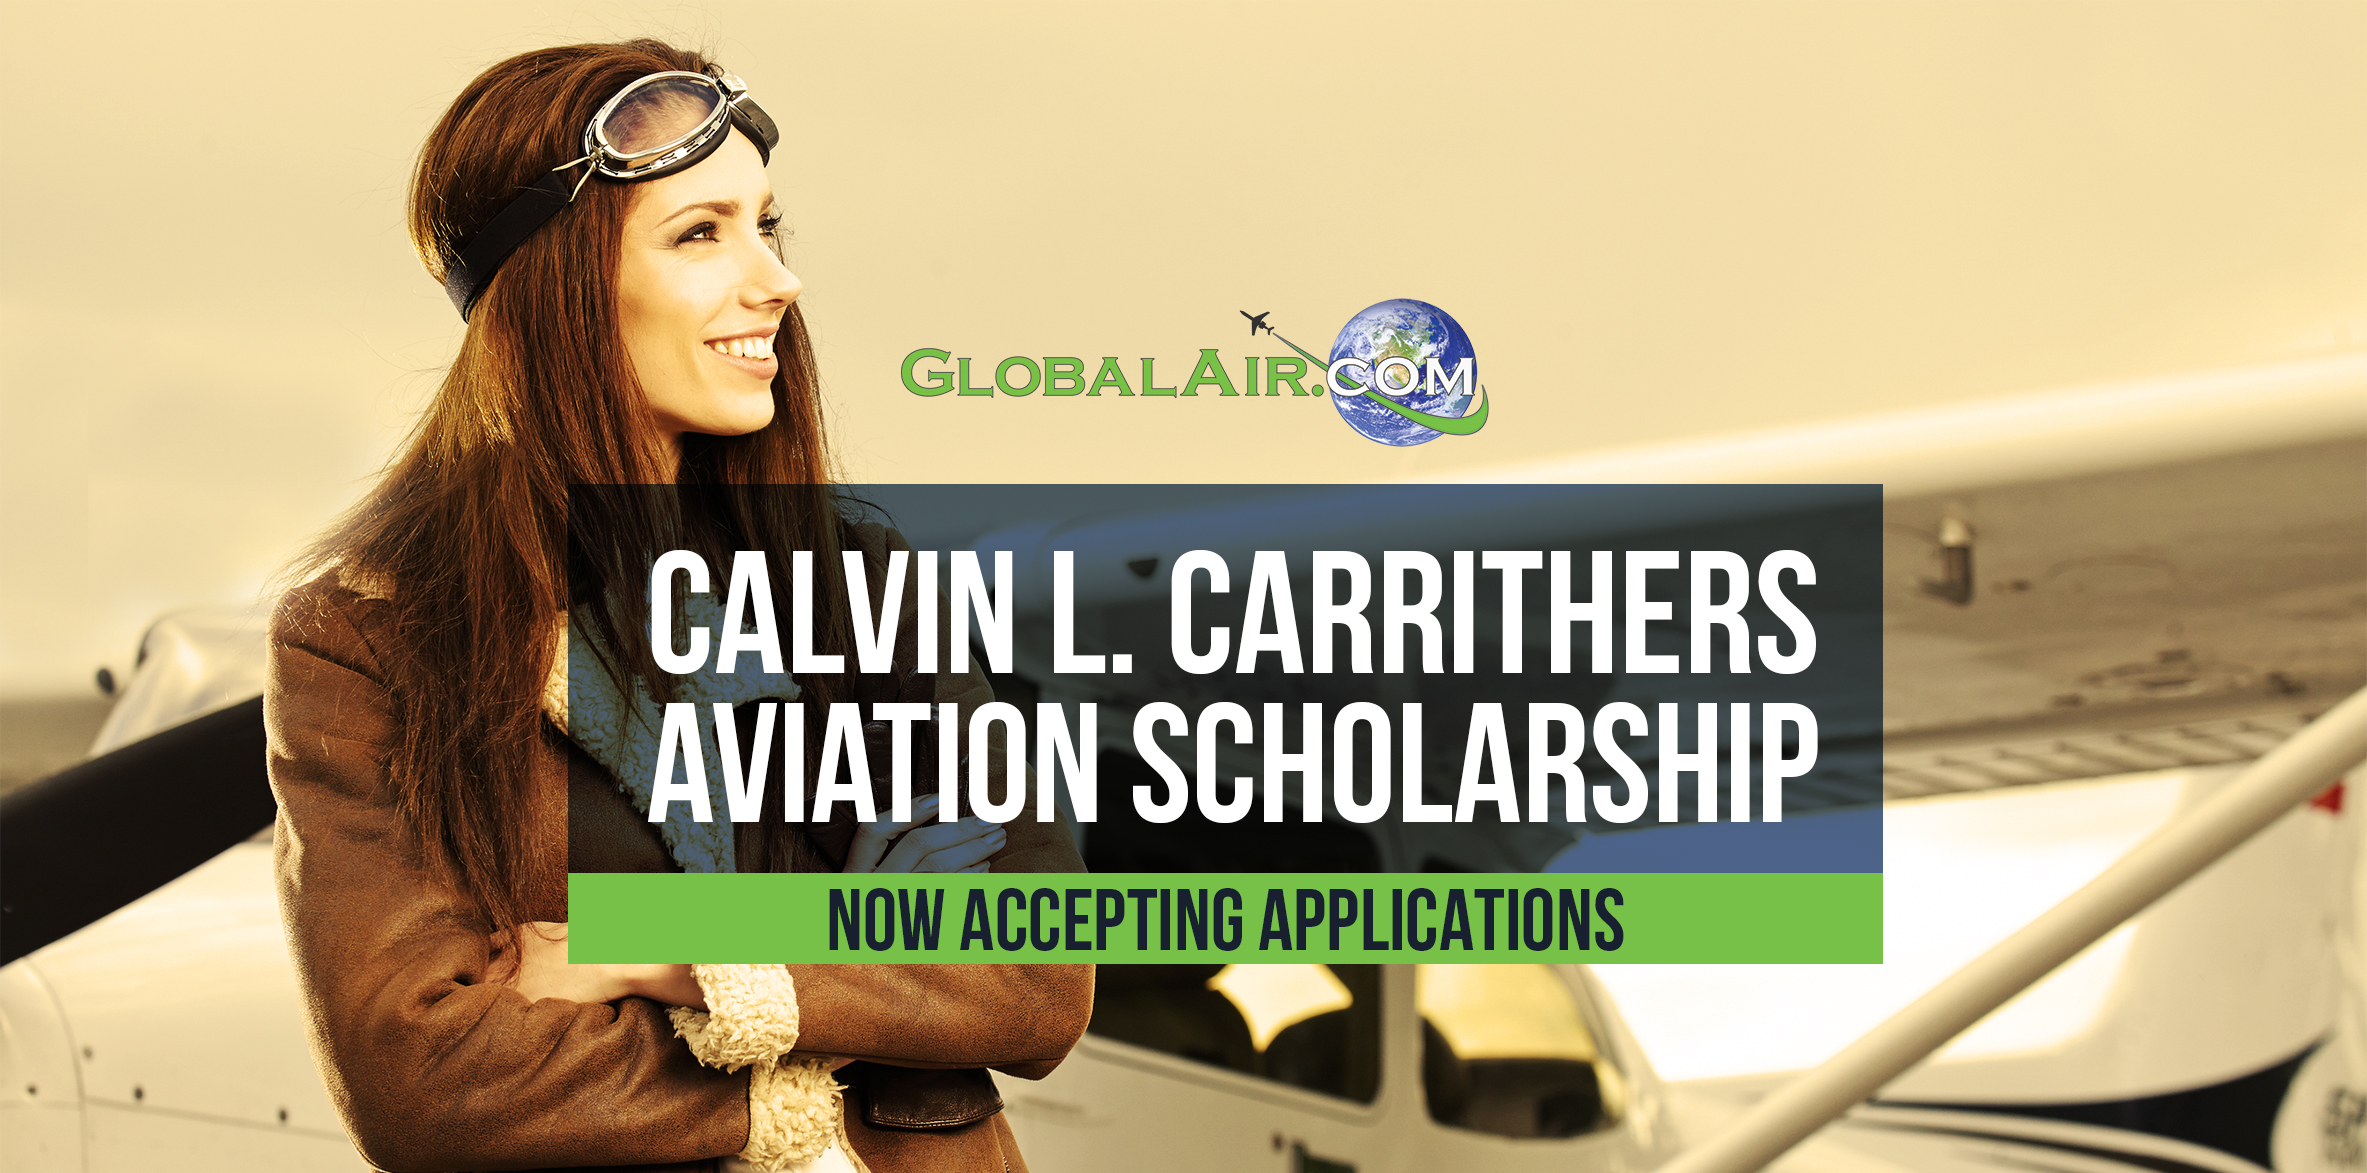 Calvin L. Carrithers Aviation Scholarship